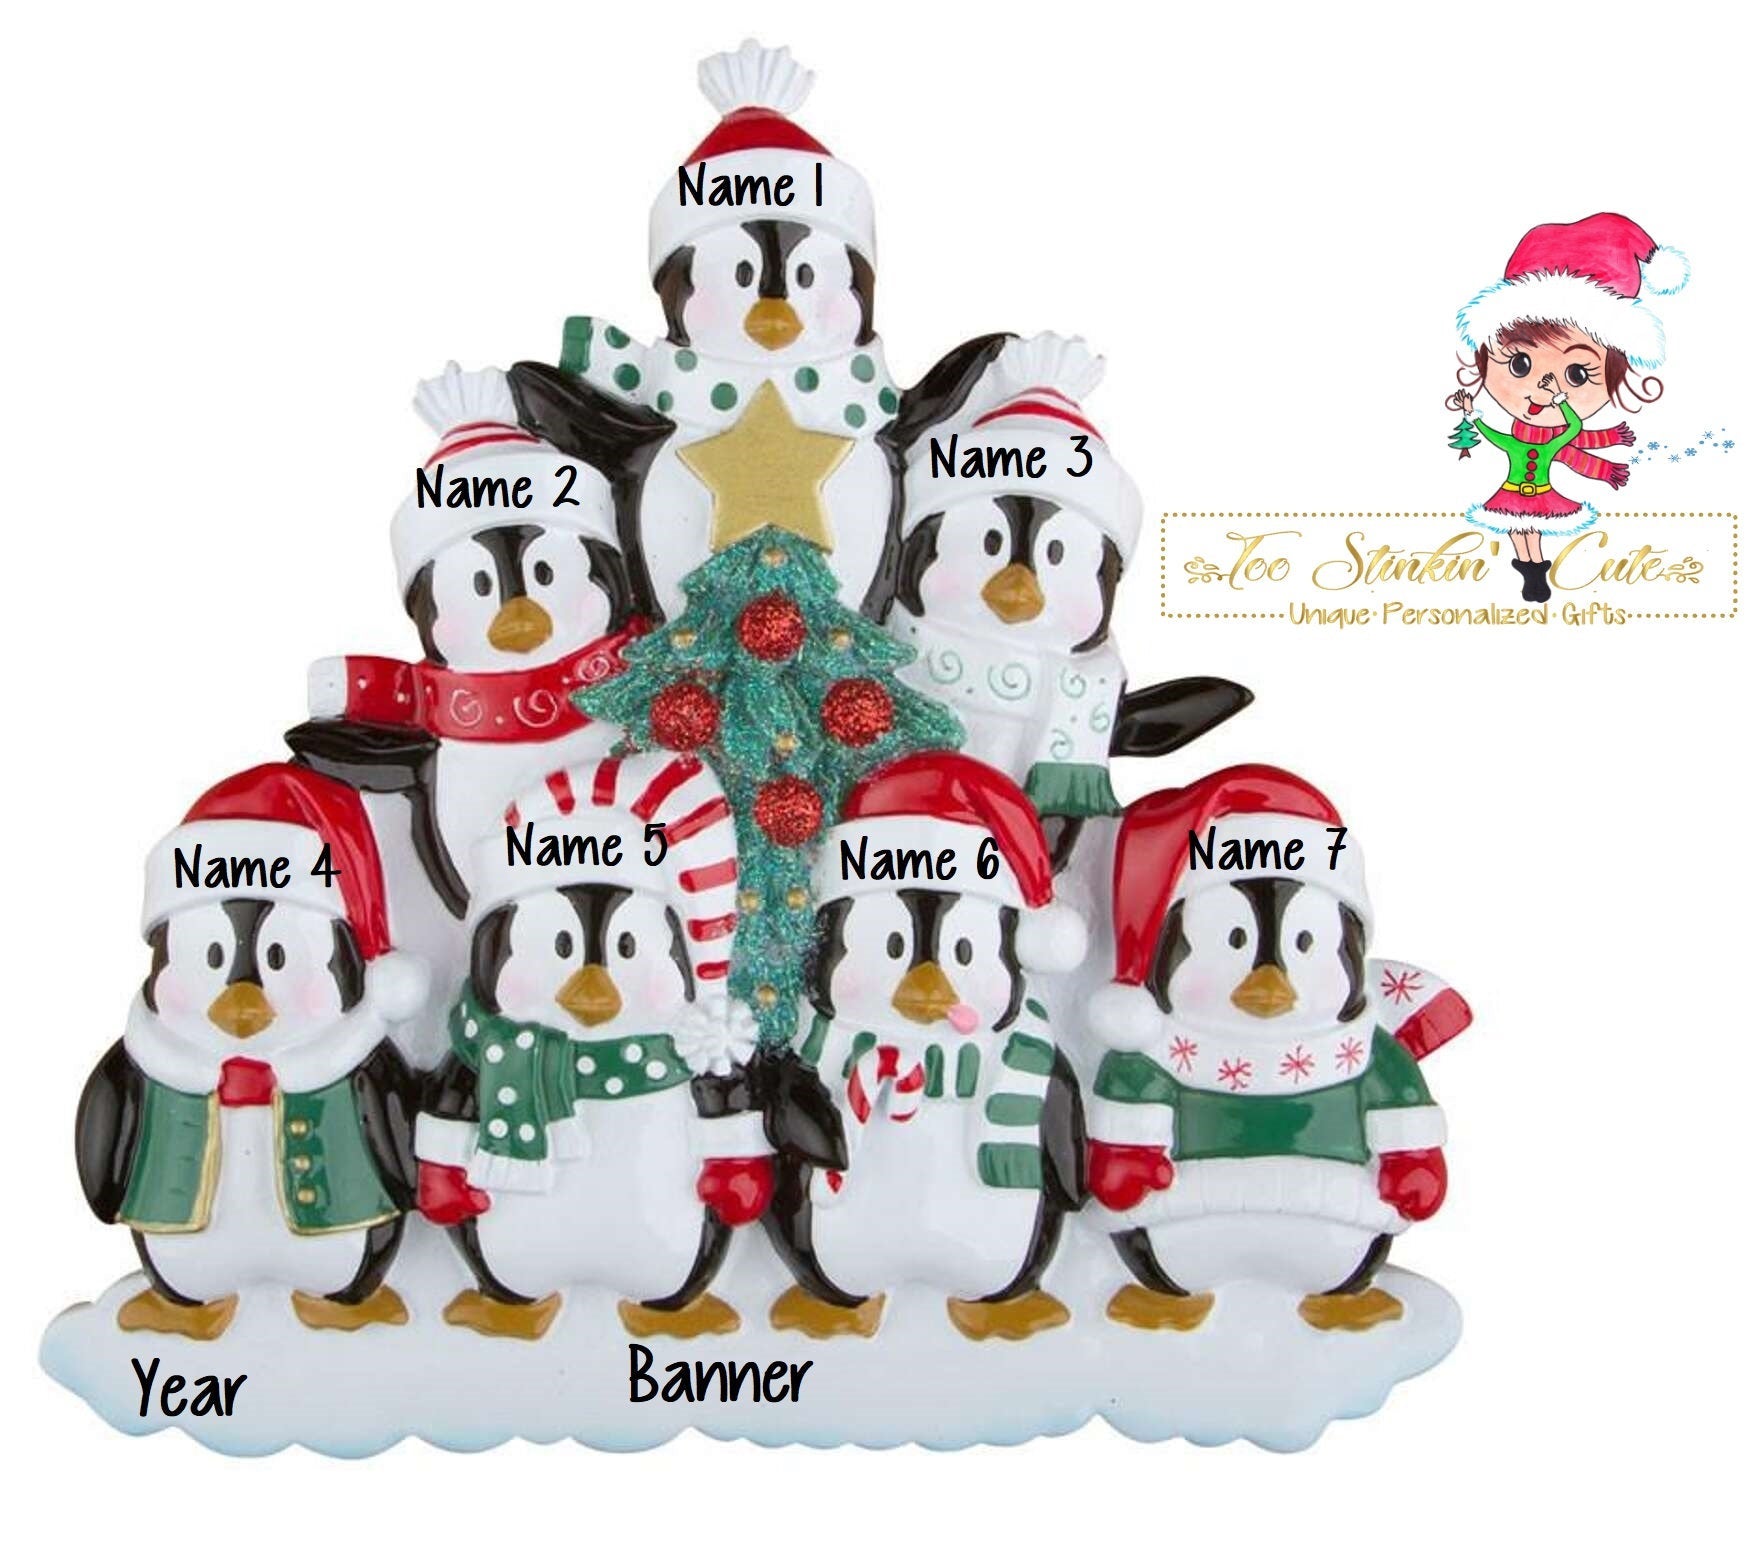 Christmas Ornament Winter Penguin Tree Family of 7/ Friends/ Coworkers - Personalized + Free Shipping!